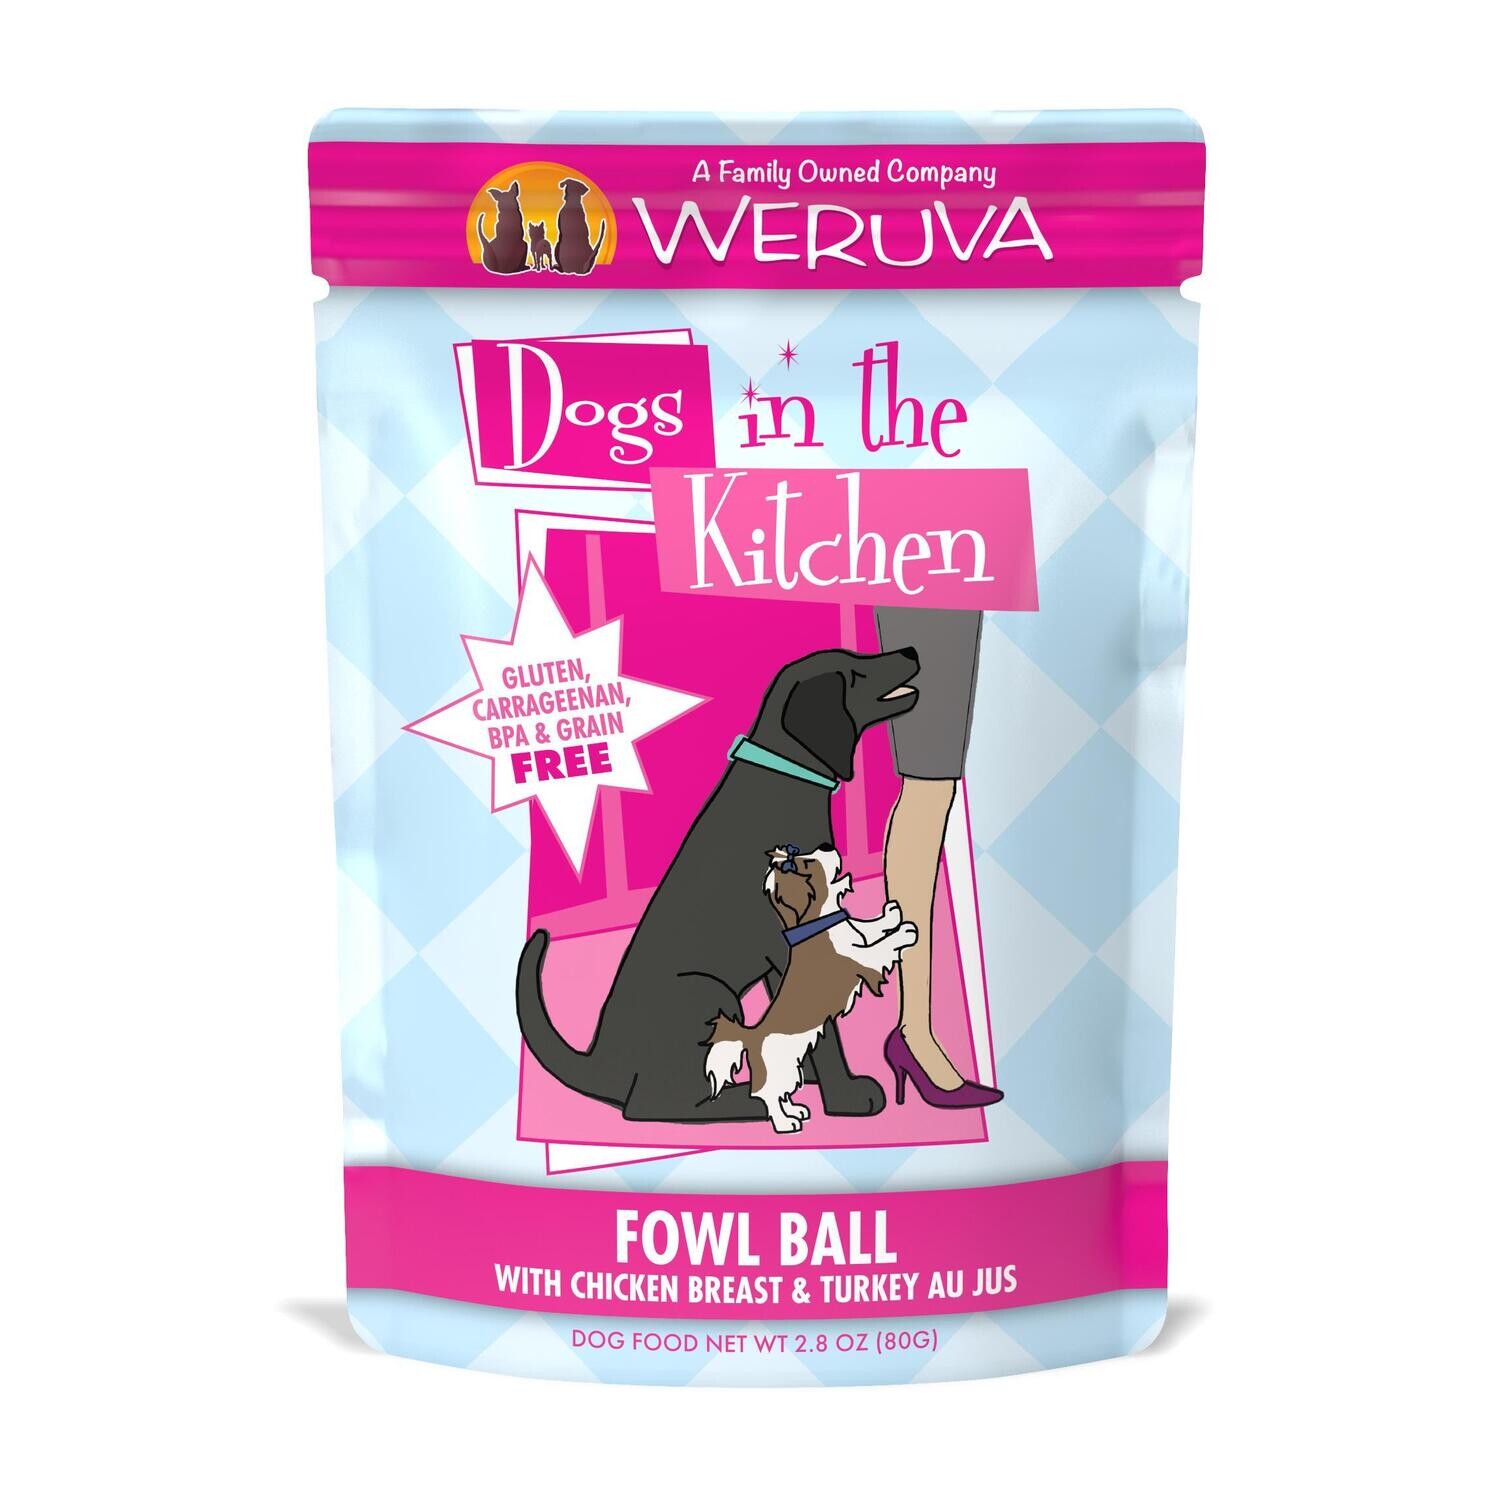 Weruva Dogs in the Kitchen Fowl Ball pouch 12/case